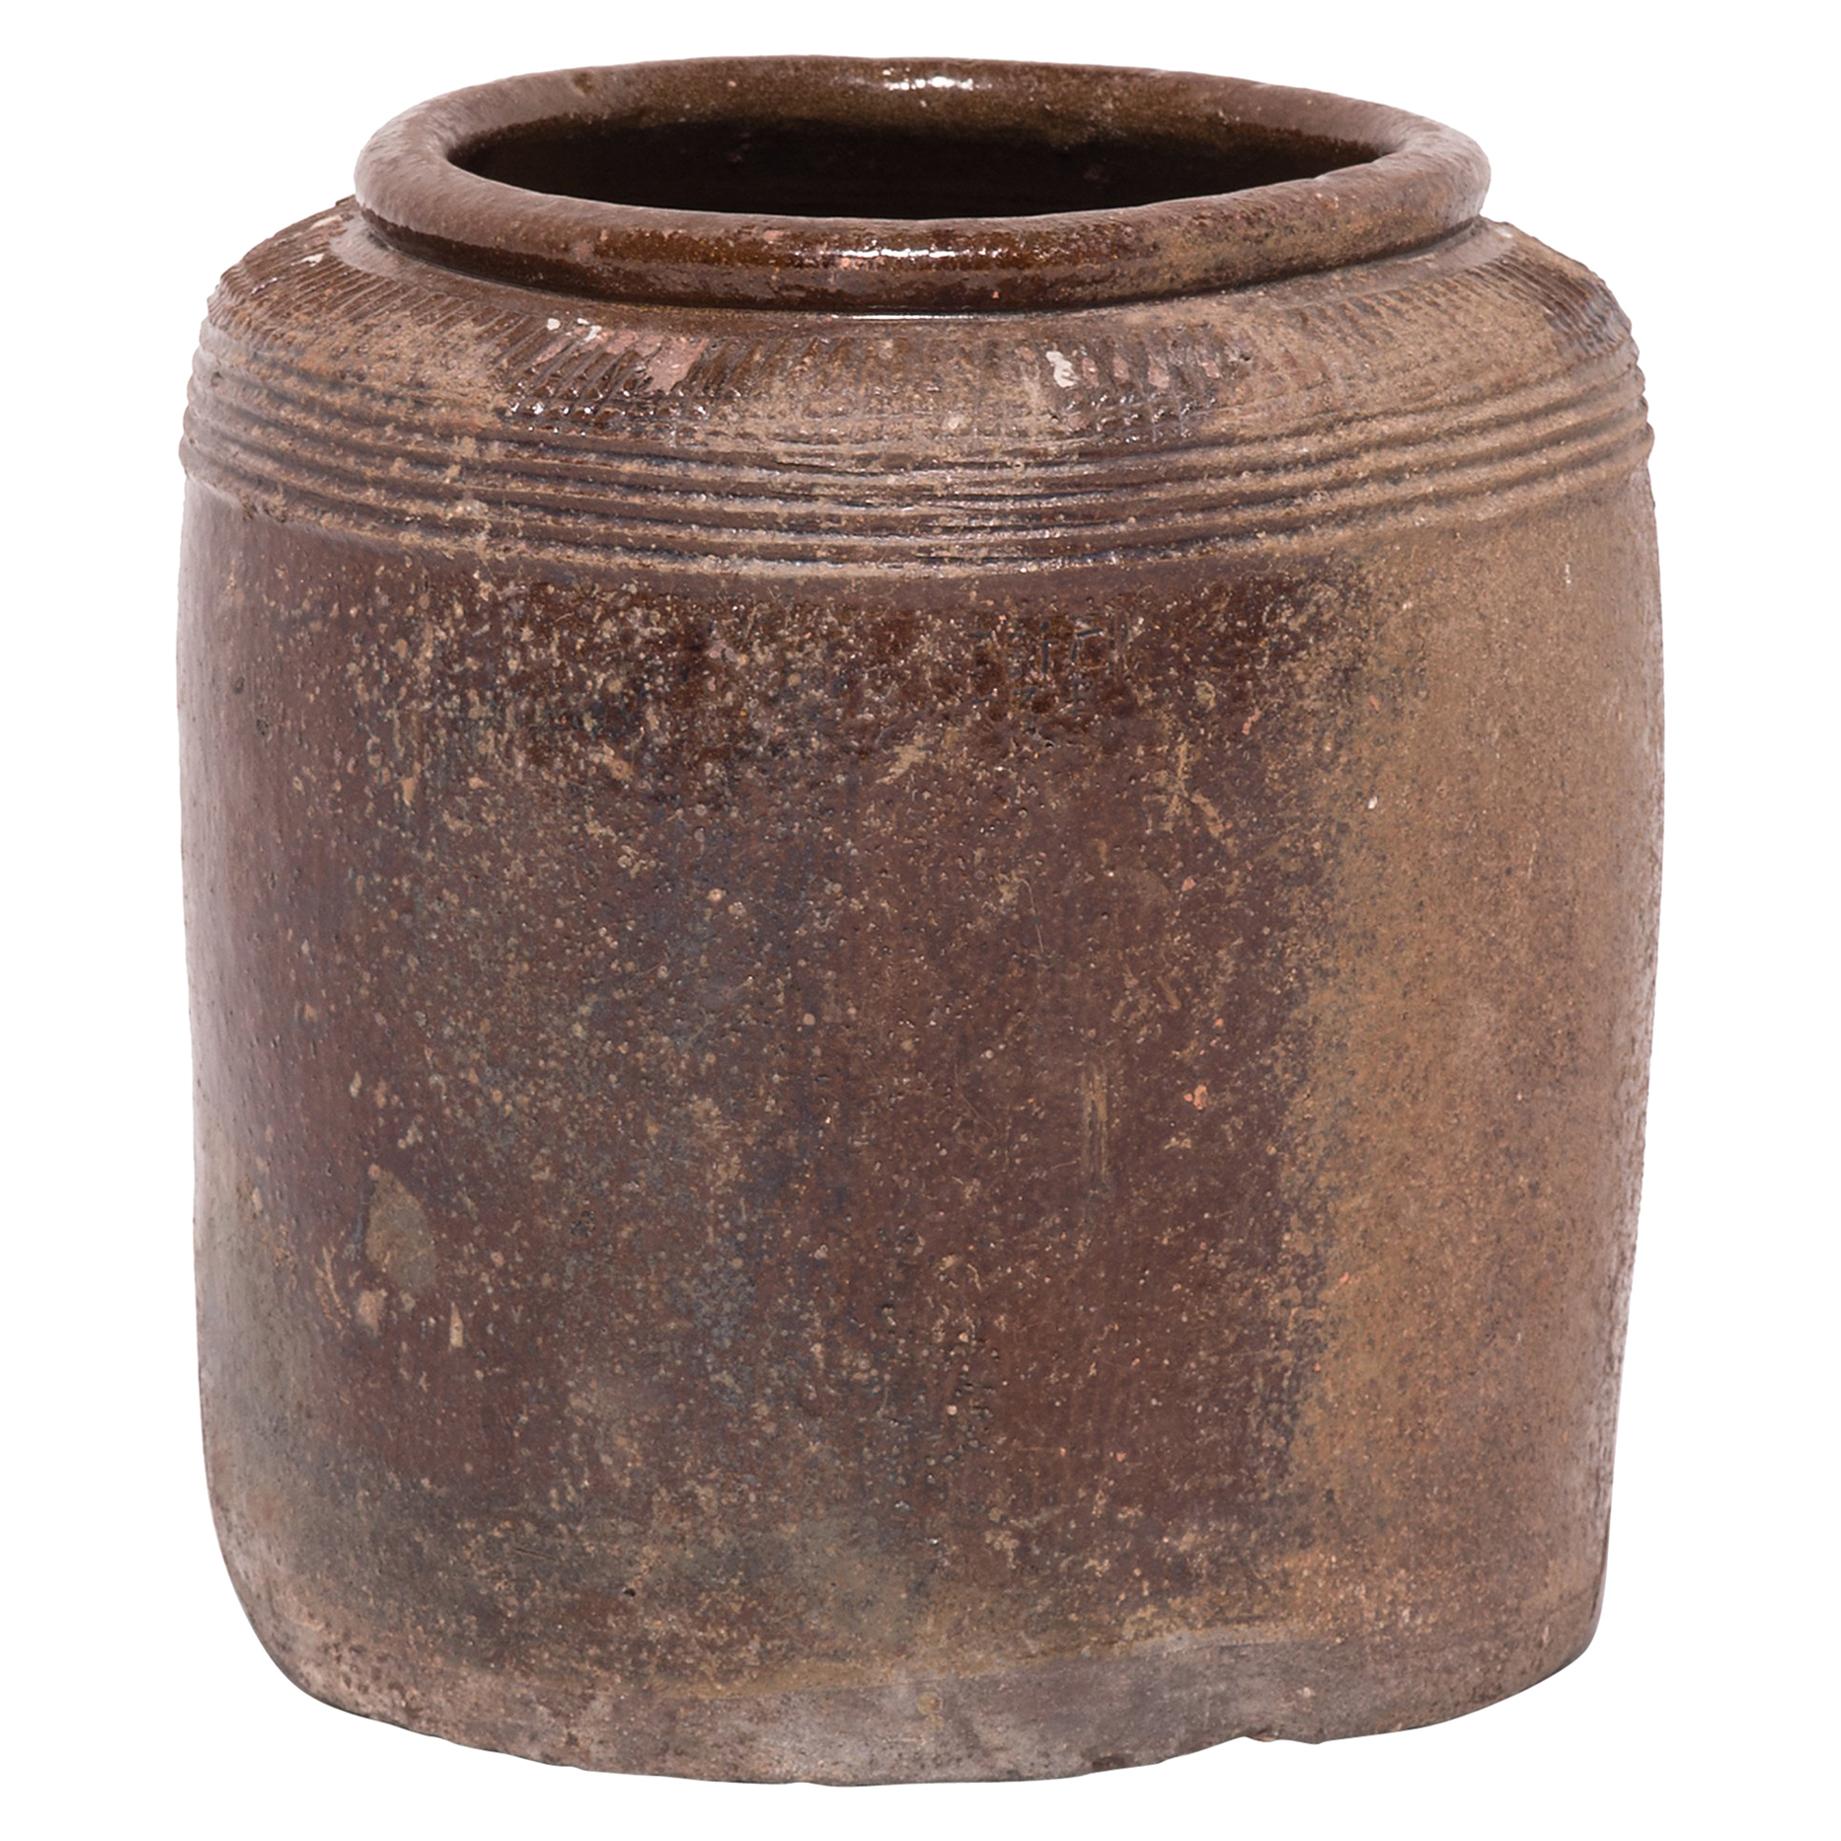 Early 20th Century Chinese Salty Egg Jar